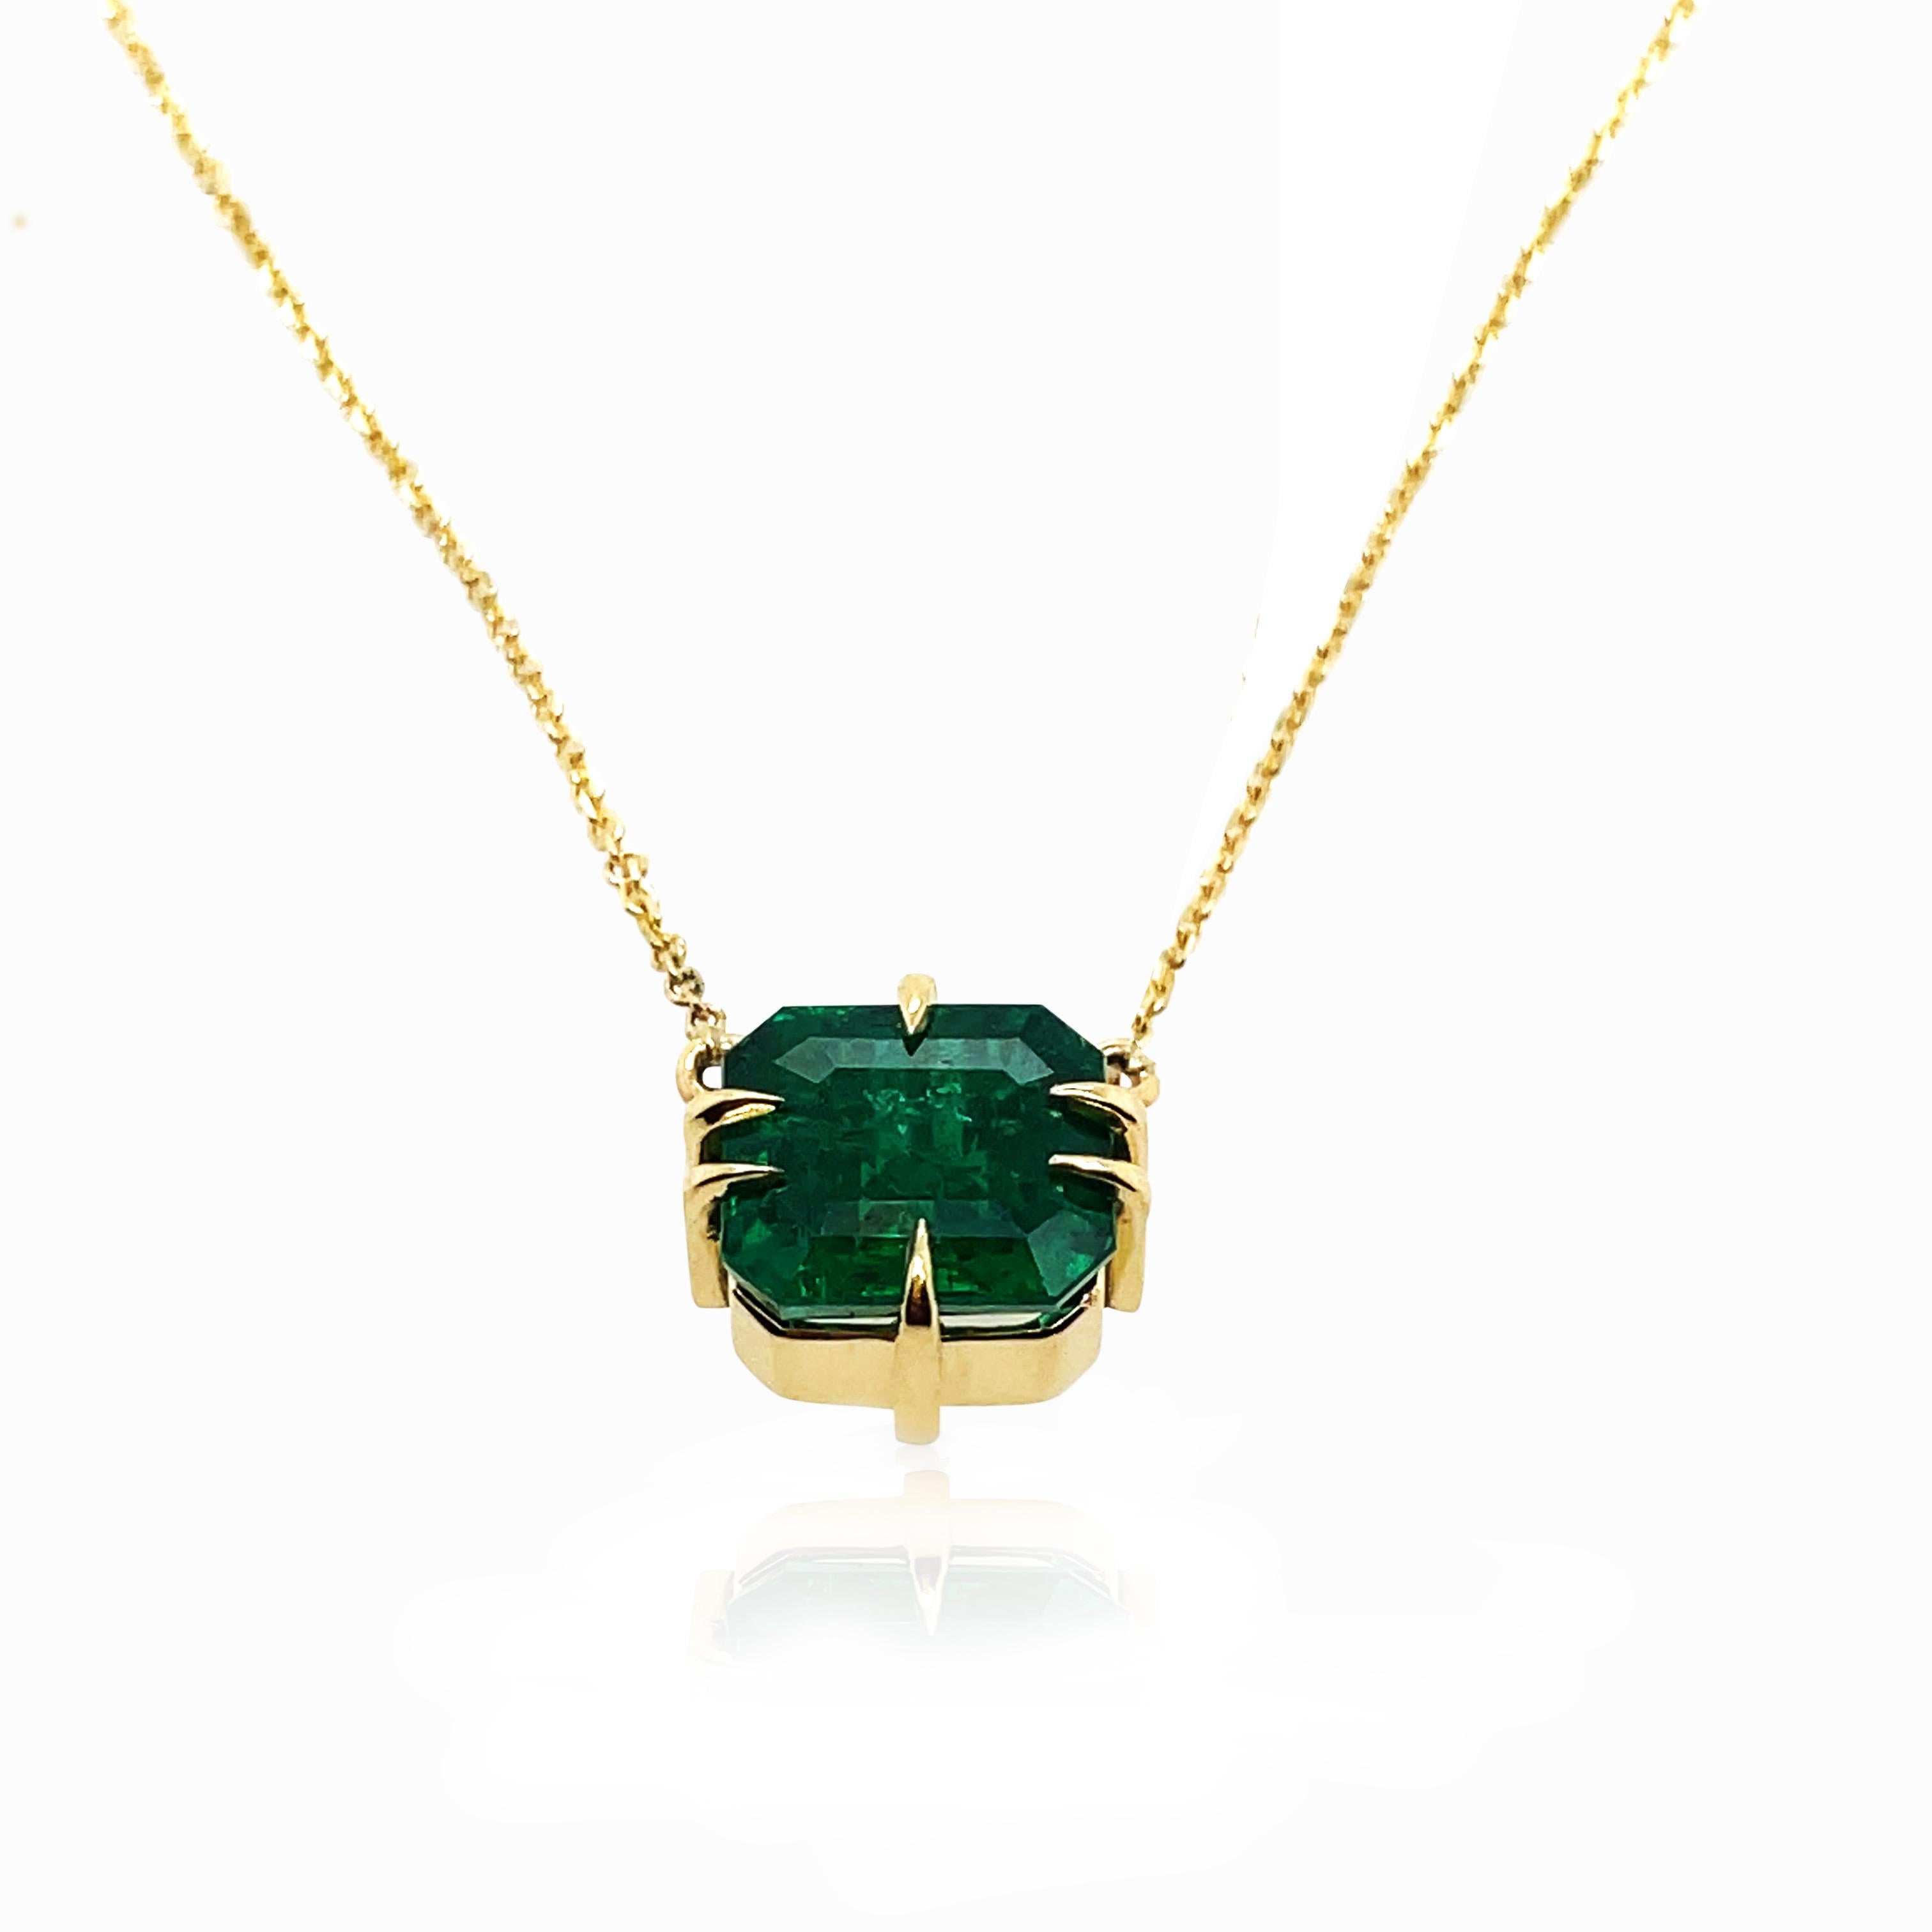 2.26ct Emerald necklace made in 18k yellow gold with chain  11